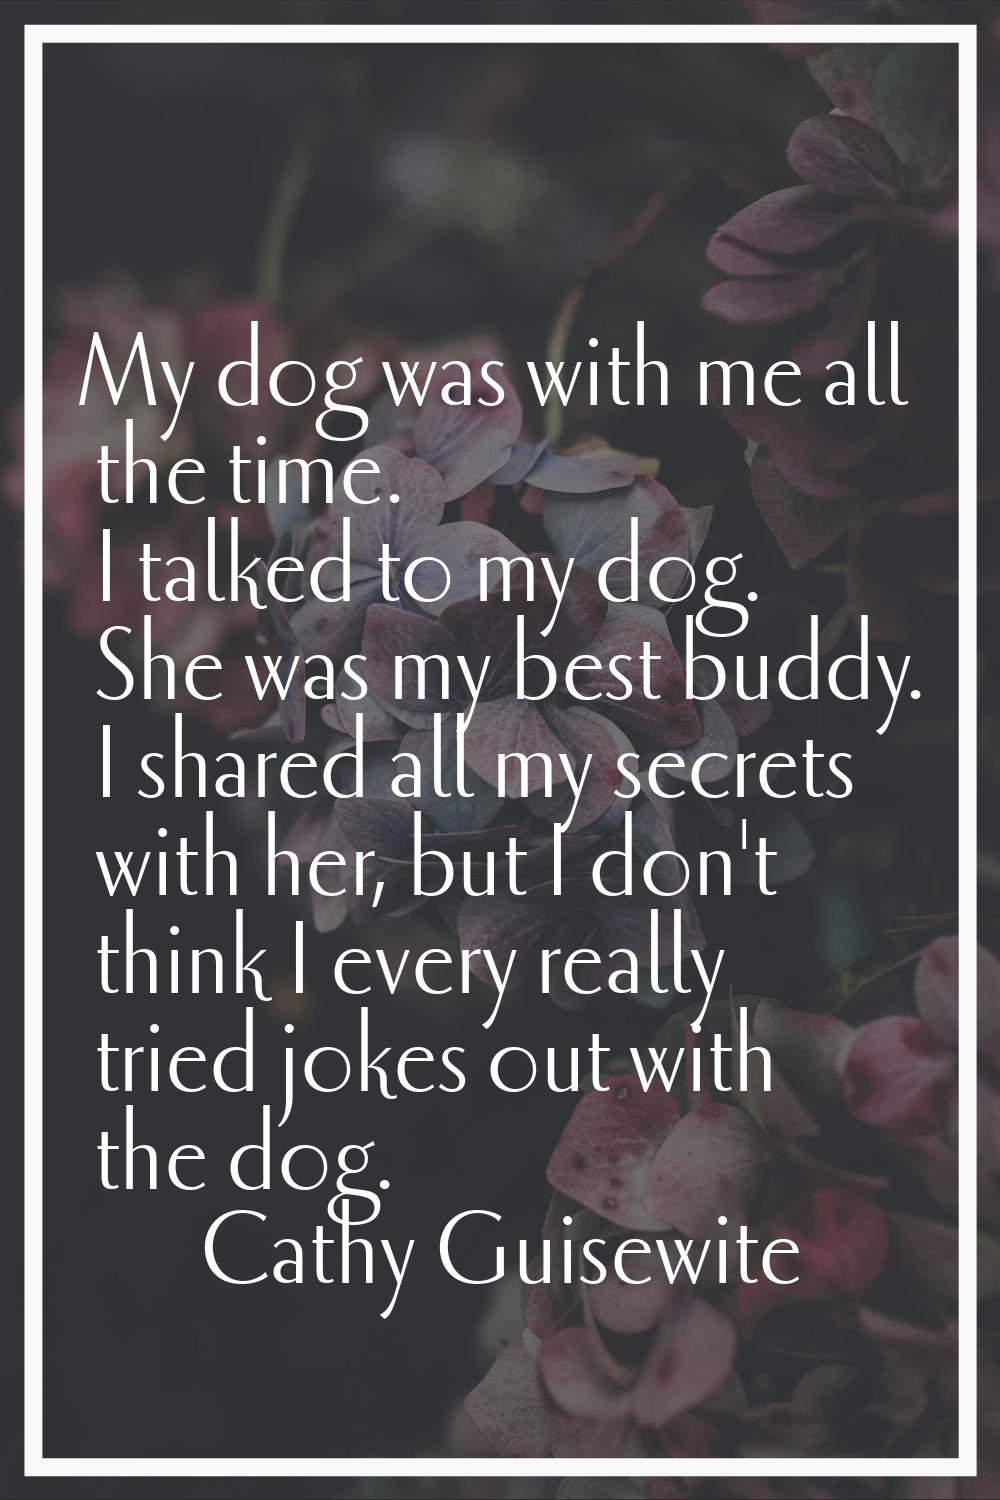 My dog was with me all the time. I talked to my dog. She was my best buddy. I shared all my secrets